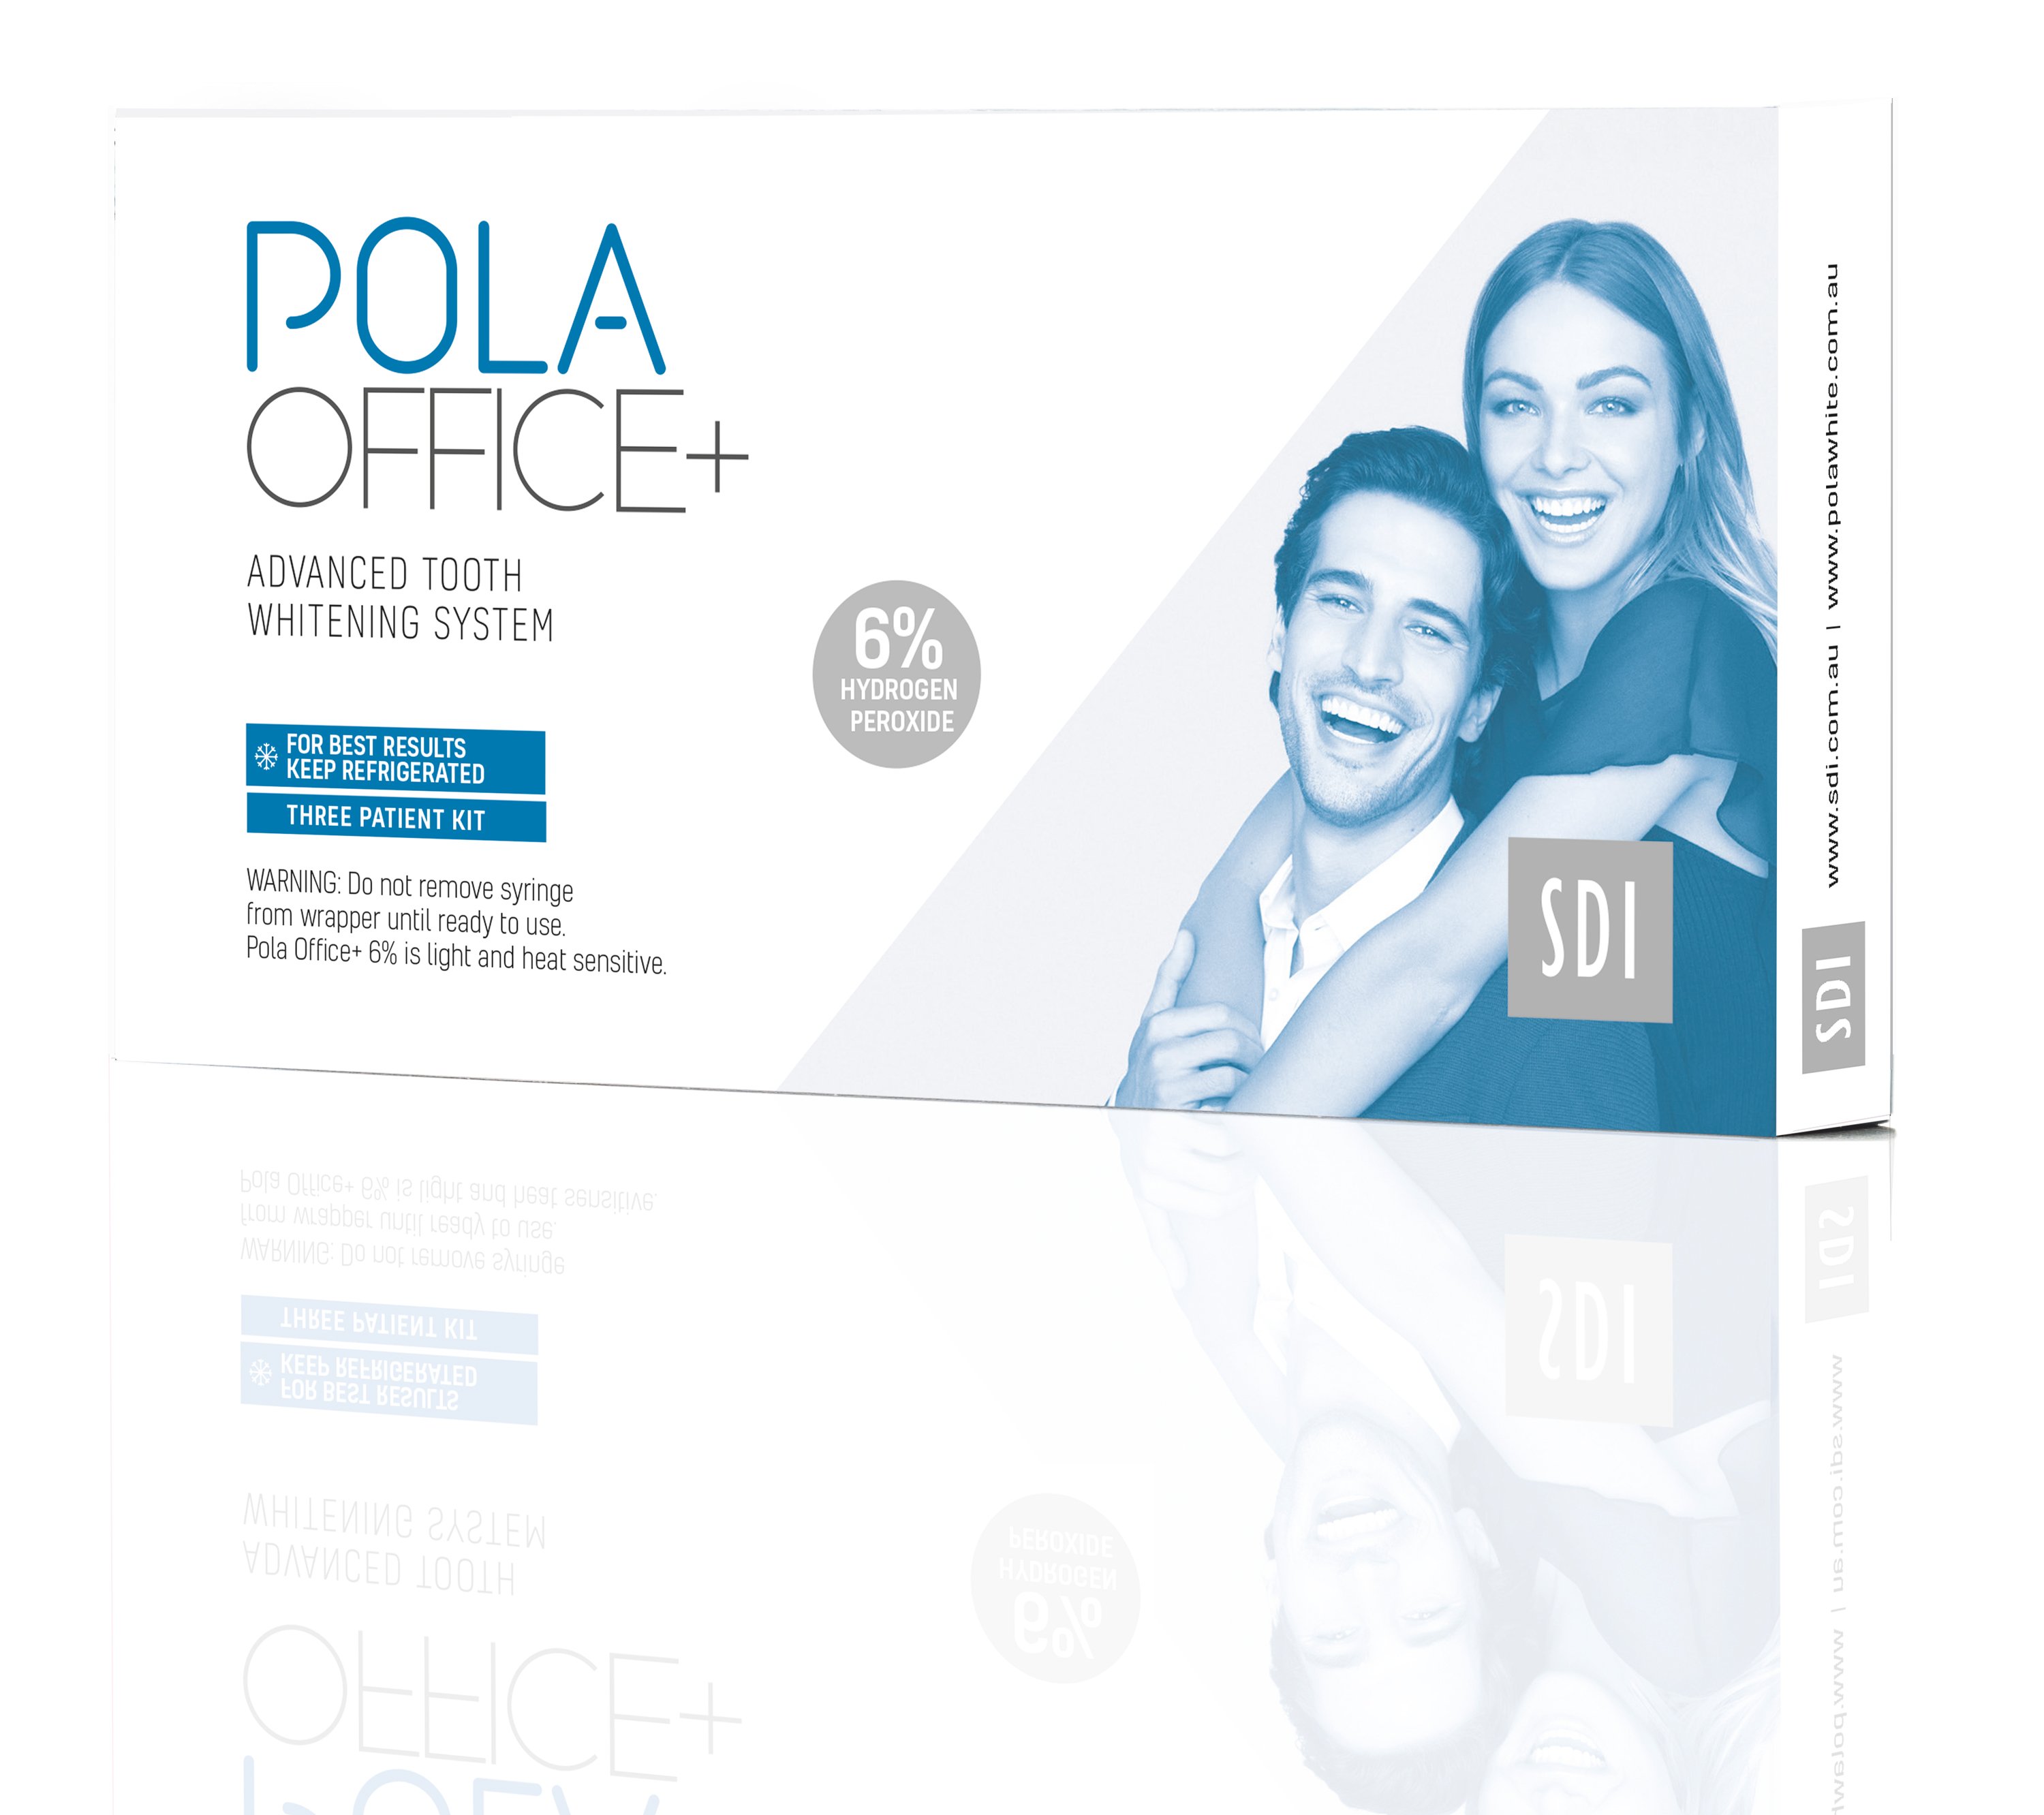 PGS126 : Pola Office Whitening System 3 Patient Kit 6% Hydrogen Peroxide